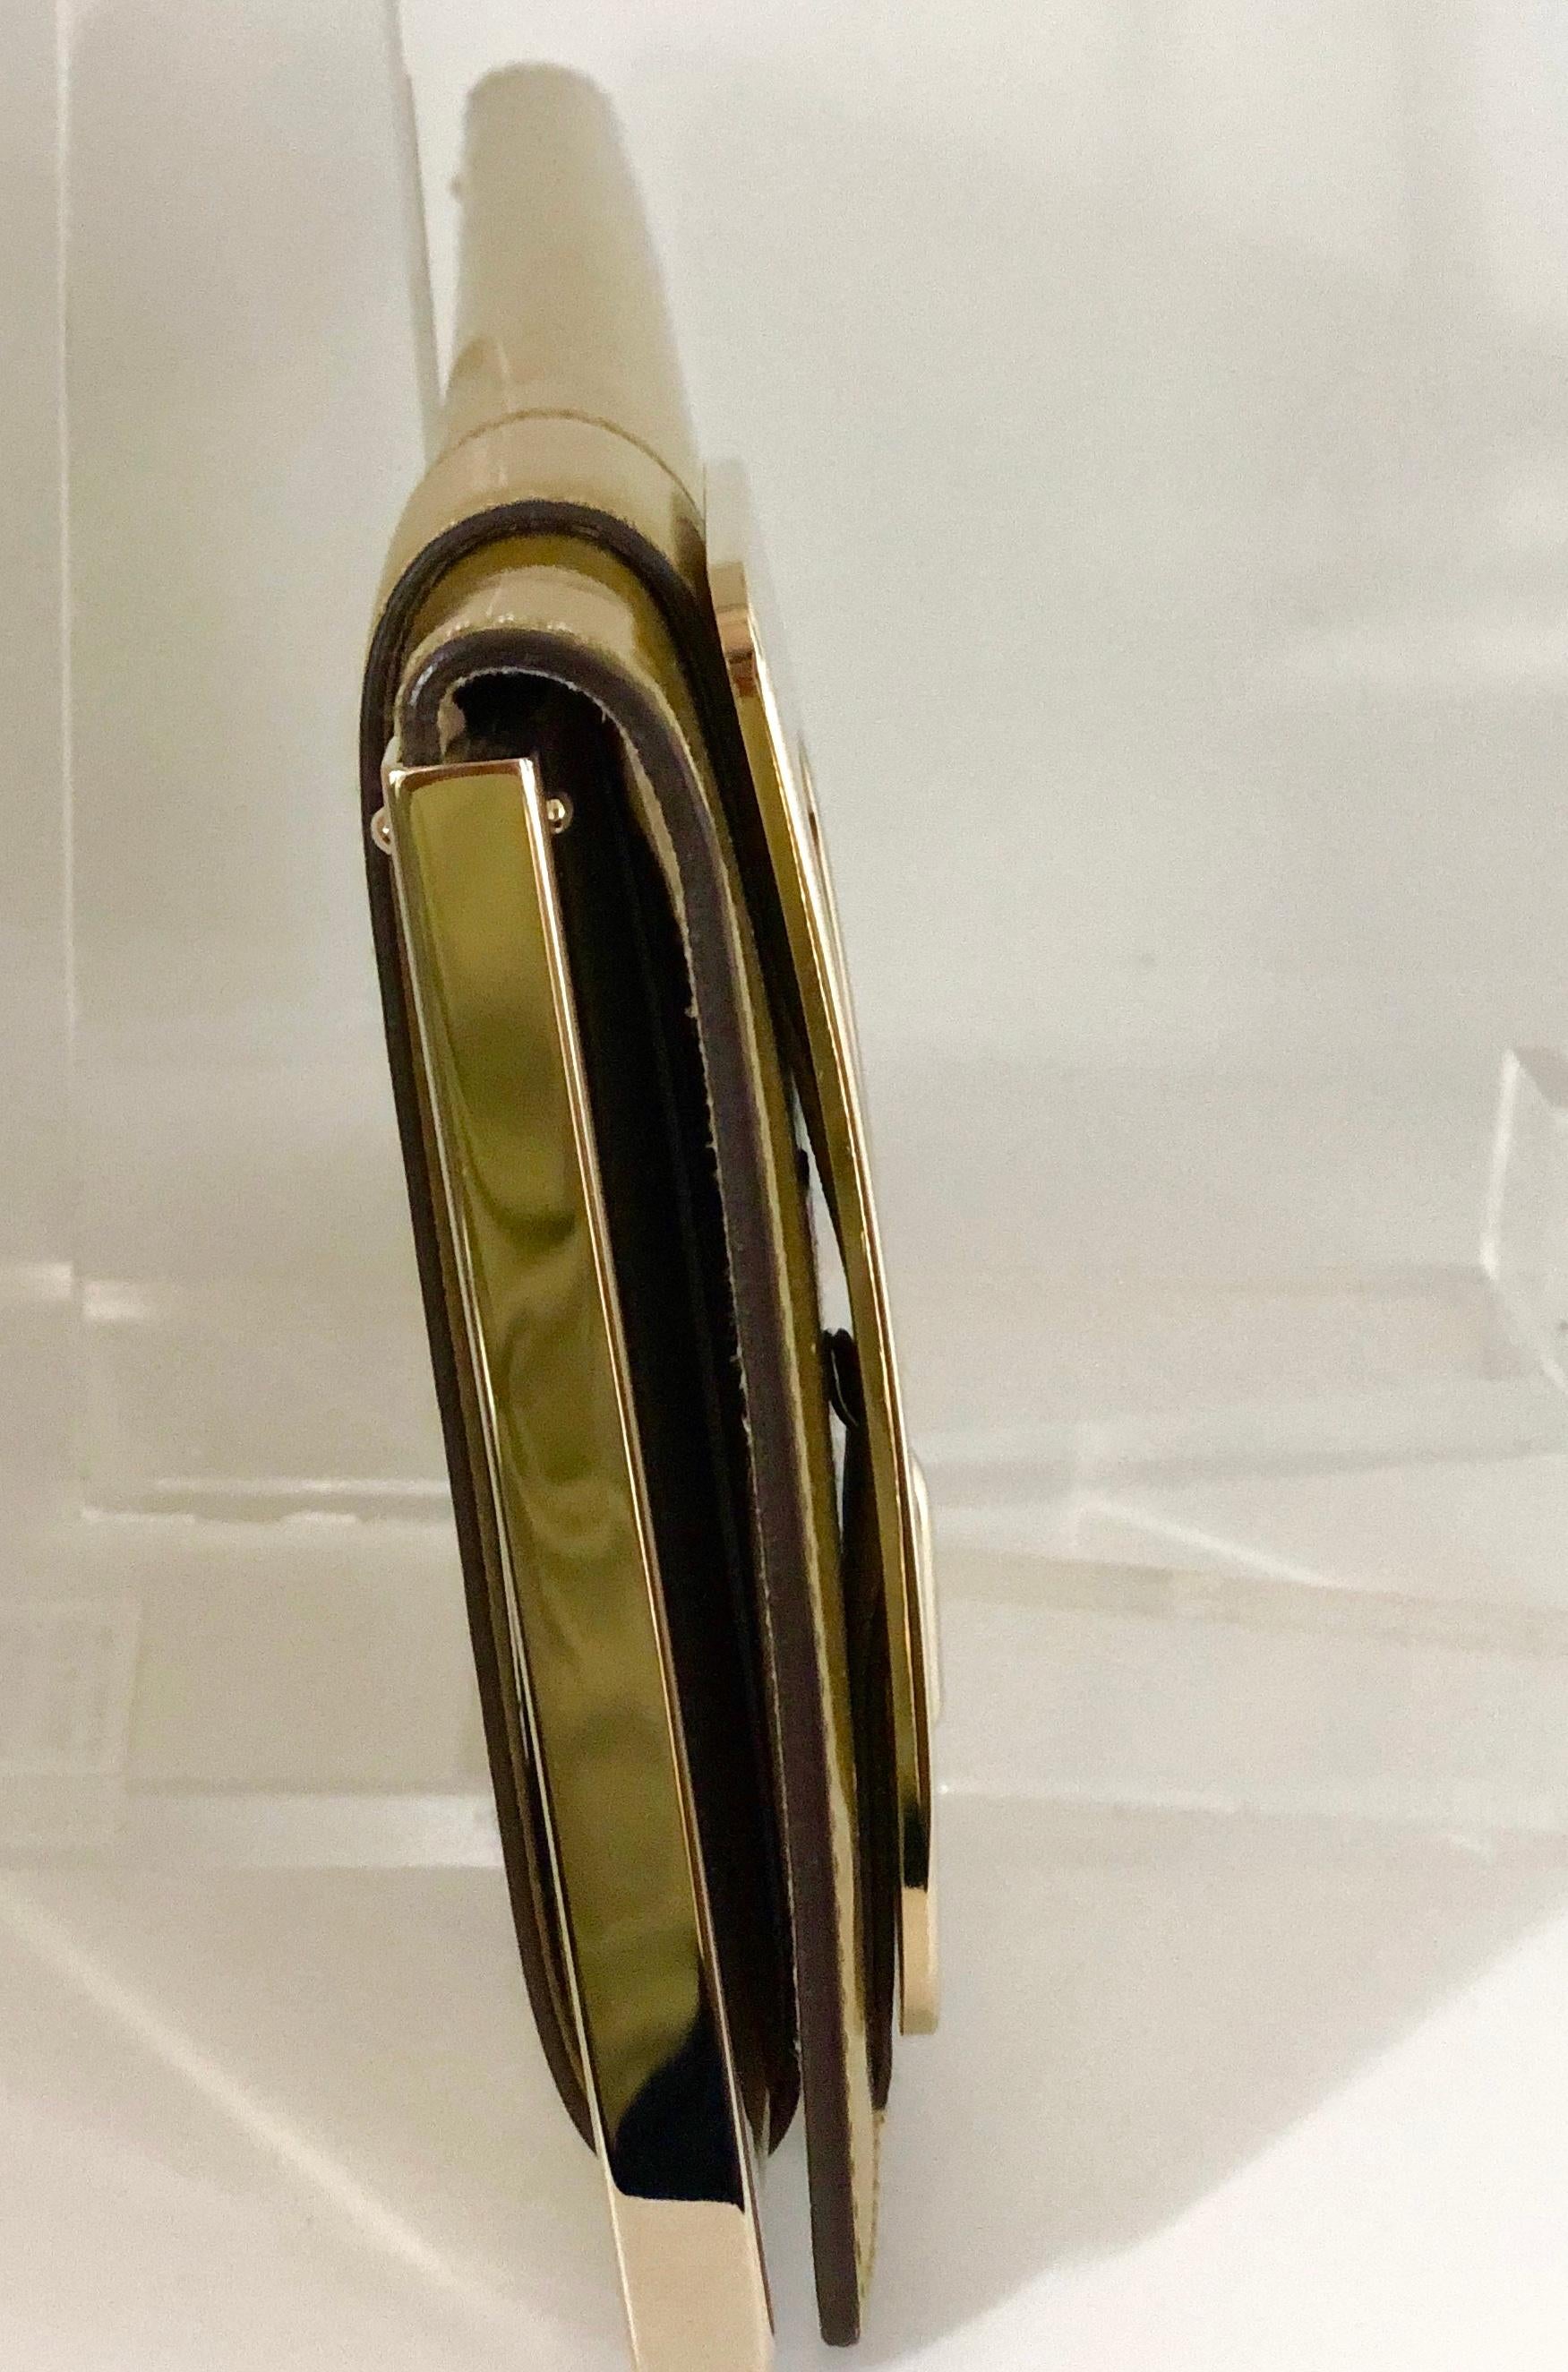 Gucci Iridescent Gold Patent Leather Elongated Clutch with Gold Metal Accents For Sale 3